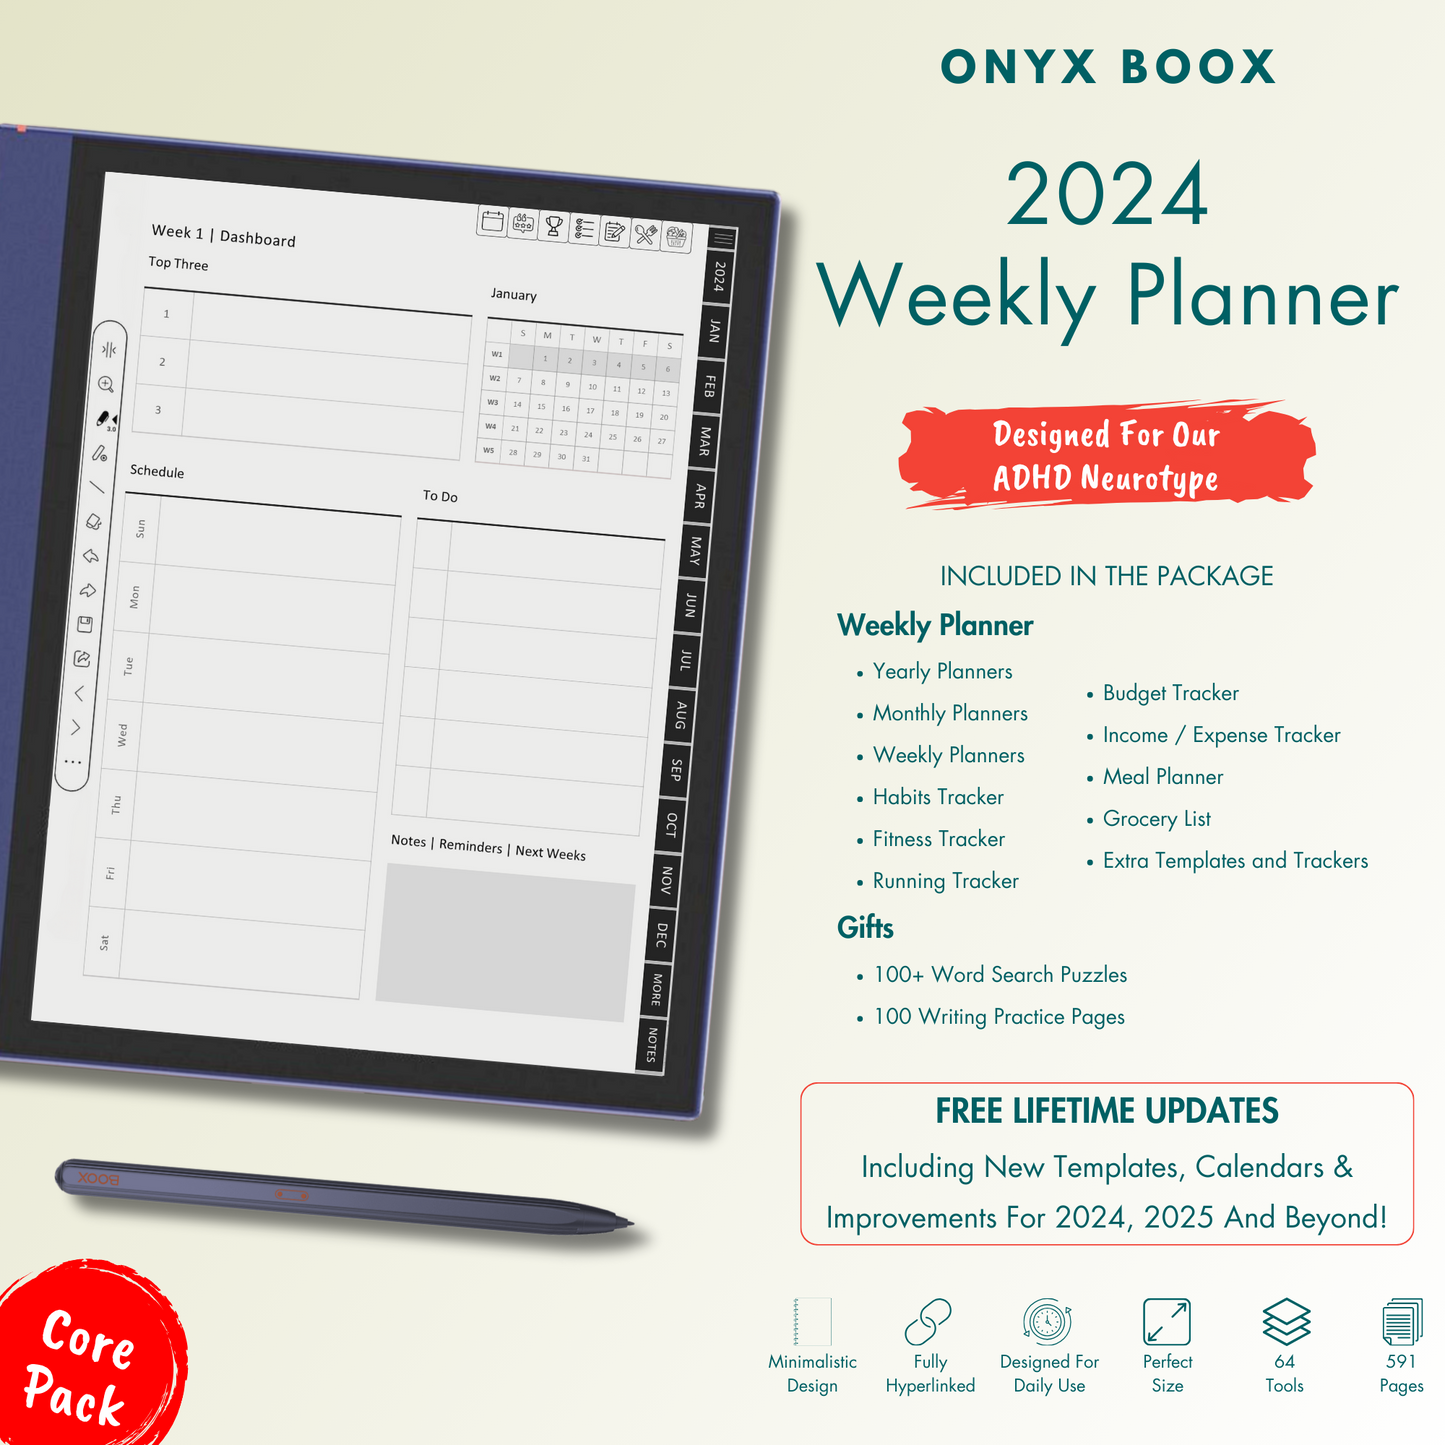 Weekly Planner 2024 for Onyx Boox.